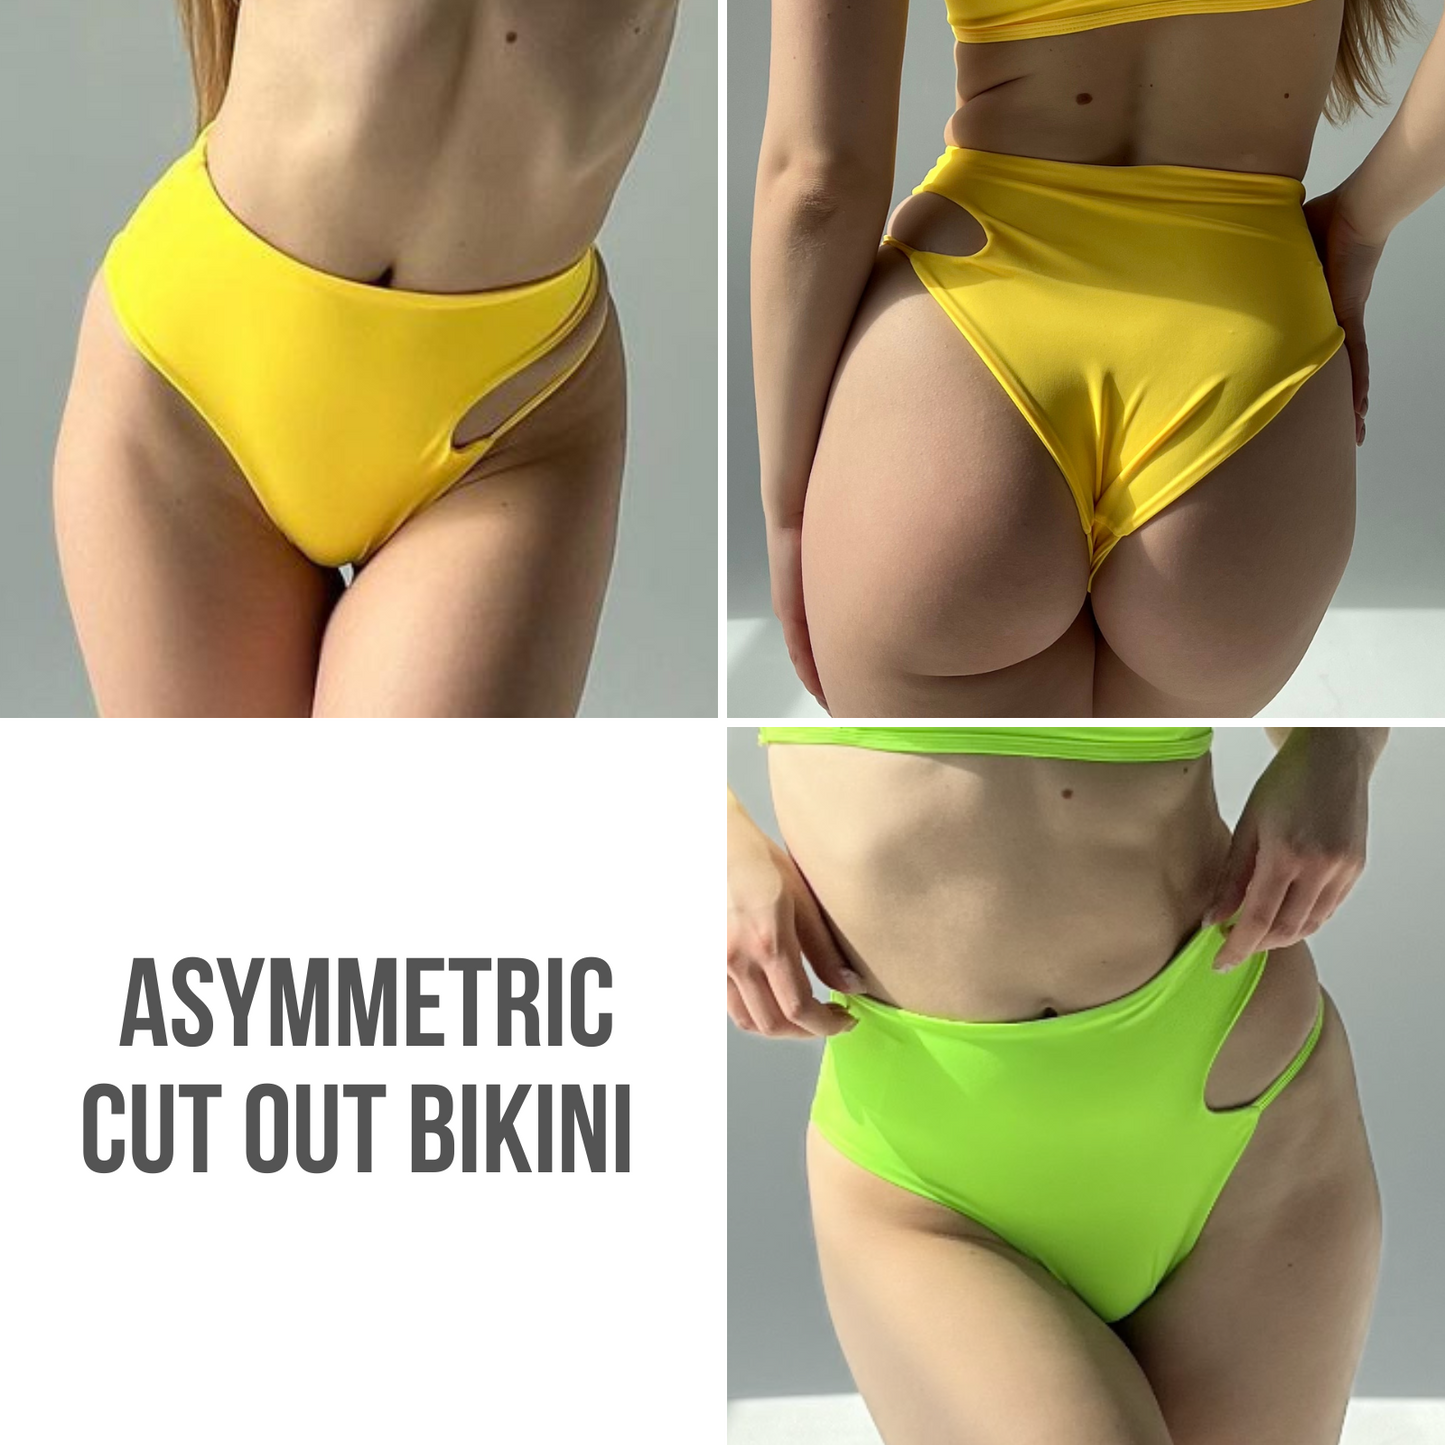 Asymmetrical cut-out two-piece swimsuit and pole dance outfit